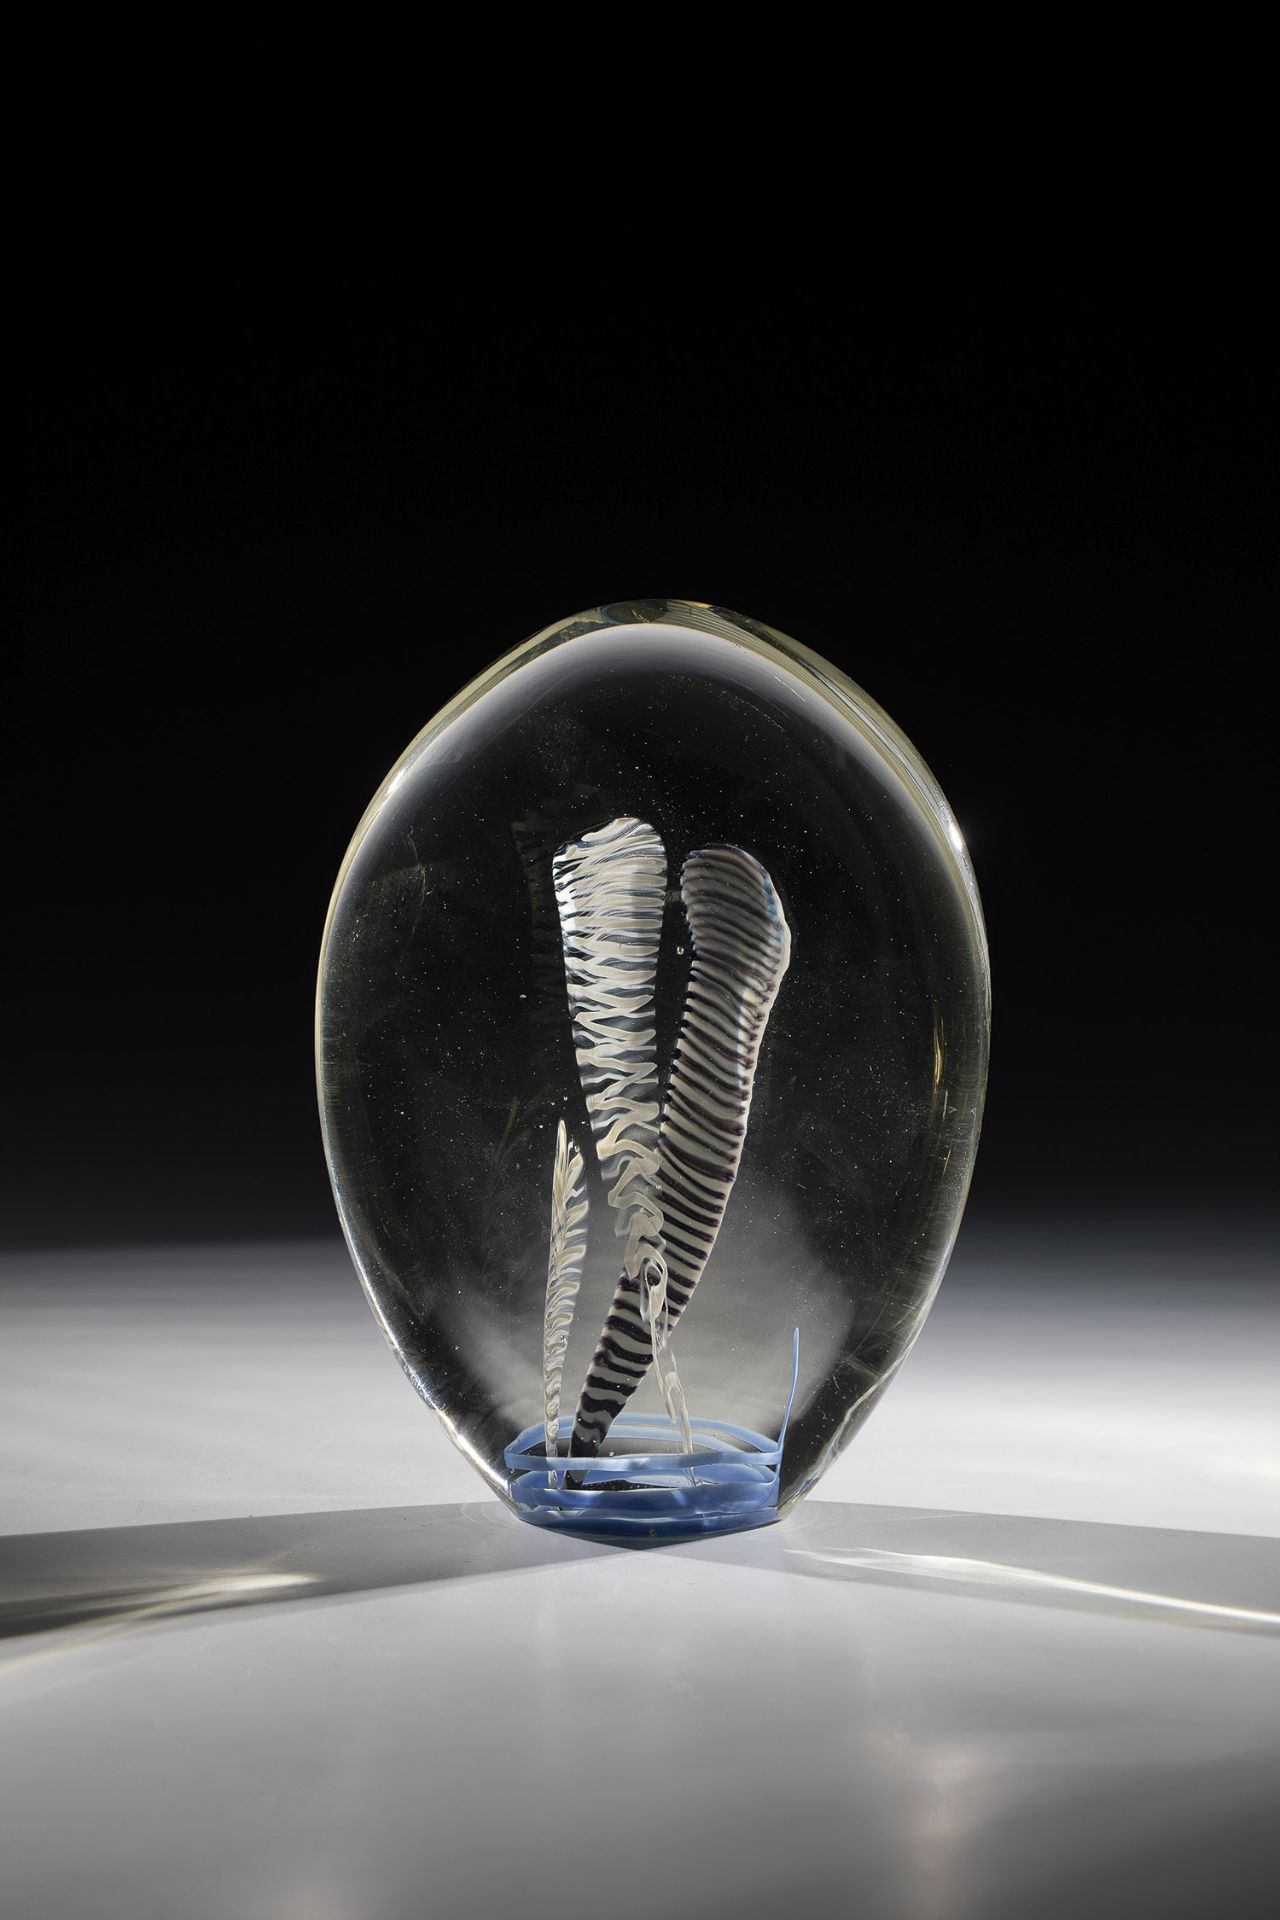 Object Volkhard Precht, 1990 Colourless glass with colour fusions in blue and opaque white. Signed